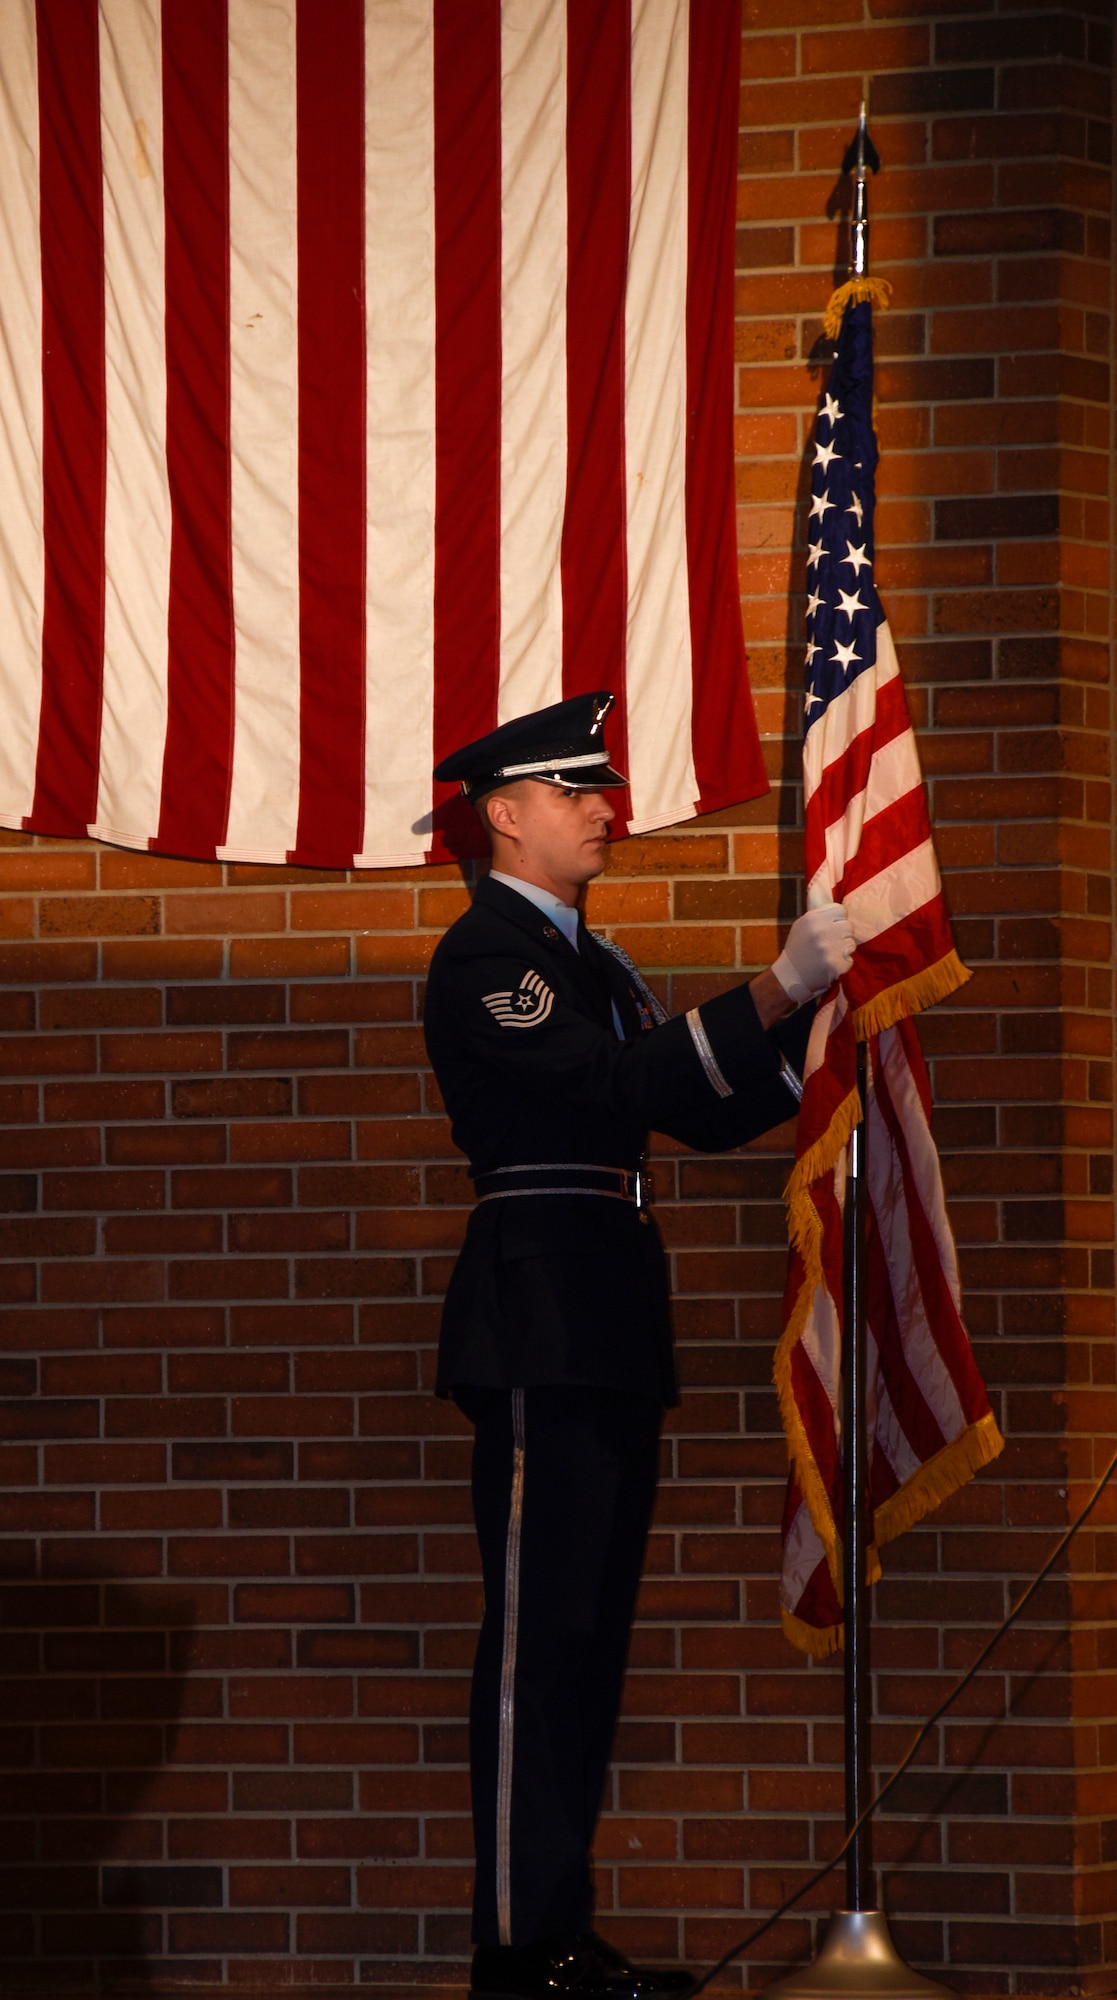 SIOUX FALLS, S.D. - Tech. Sgt. Alex Oppold, 114th Communication Flight cyber security technician, posts the U.S. flag during this years Veteran's Day program at Lincoln High School, Sioux Falls, S.D. The 114th Fighter Wing color guard is organized through the Non-Commissioned Officer Academy Graduates Association where they strive to instill pride and esprit de’ corps through patriotism and community involvement. (U.S. Air Guard photo by Staff Sgt. Duane Duimstra/Released)

